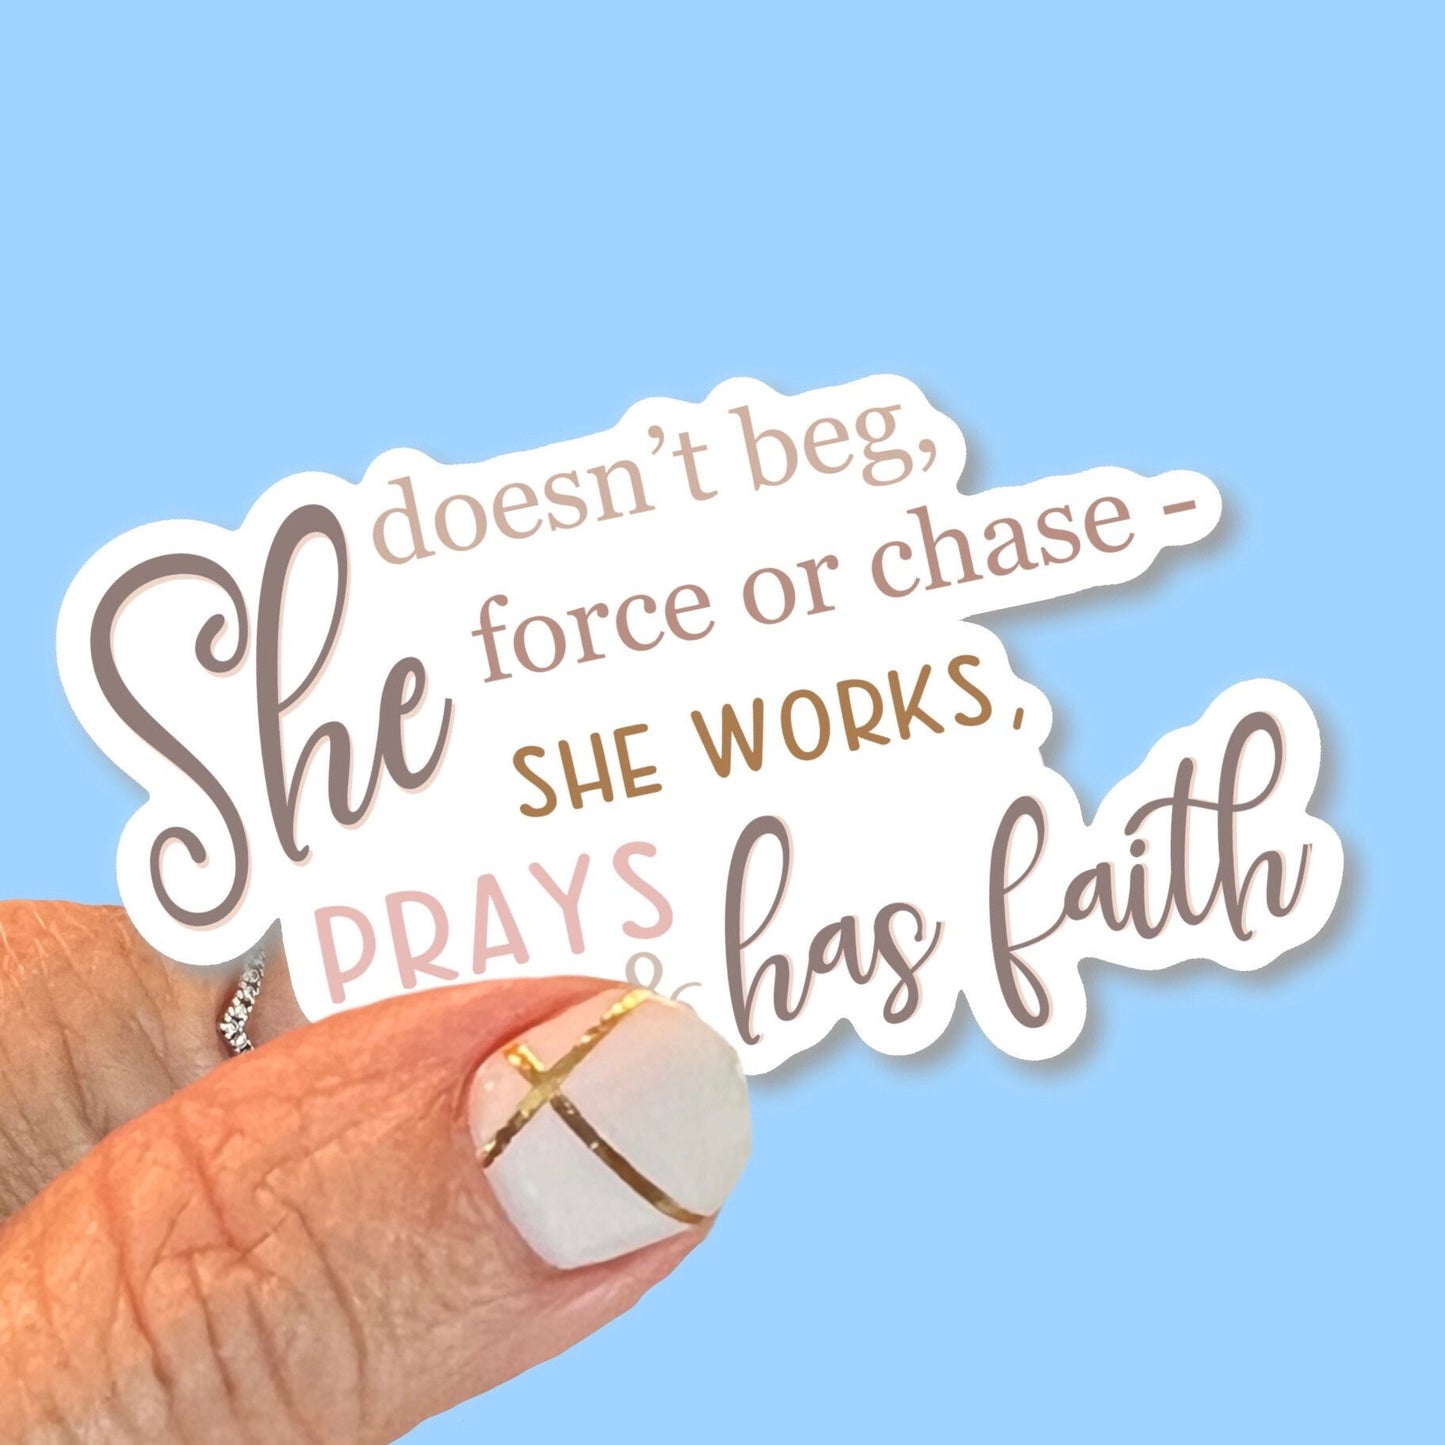 She doesn't beg, force or chase - she works, prays and has faith - Christian Faith UV/ Waterproof Vinyl Sticker/ Decal- Choice of Size